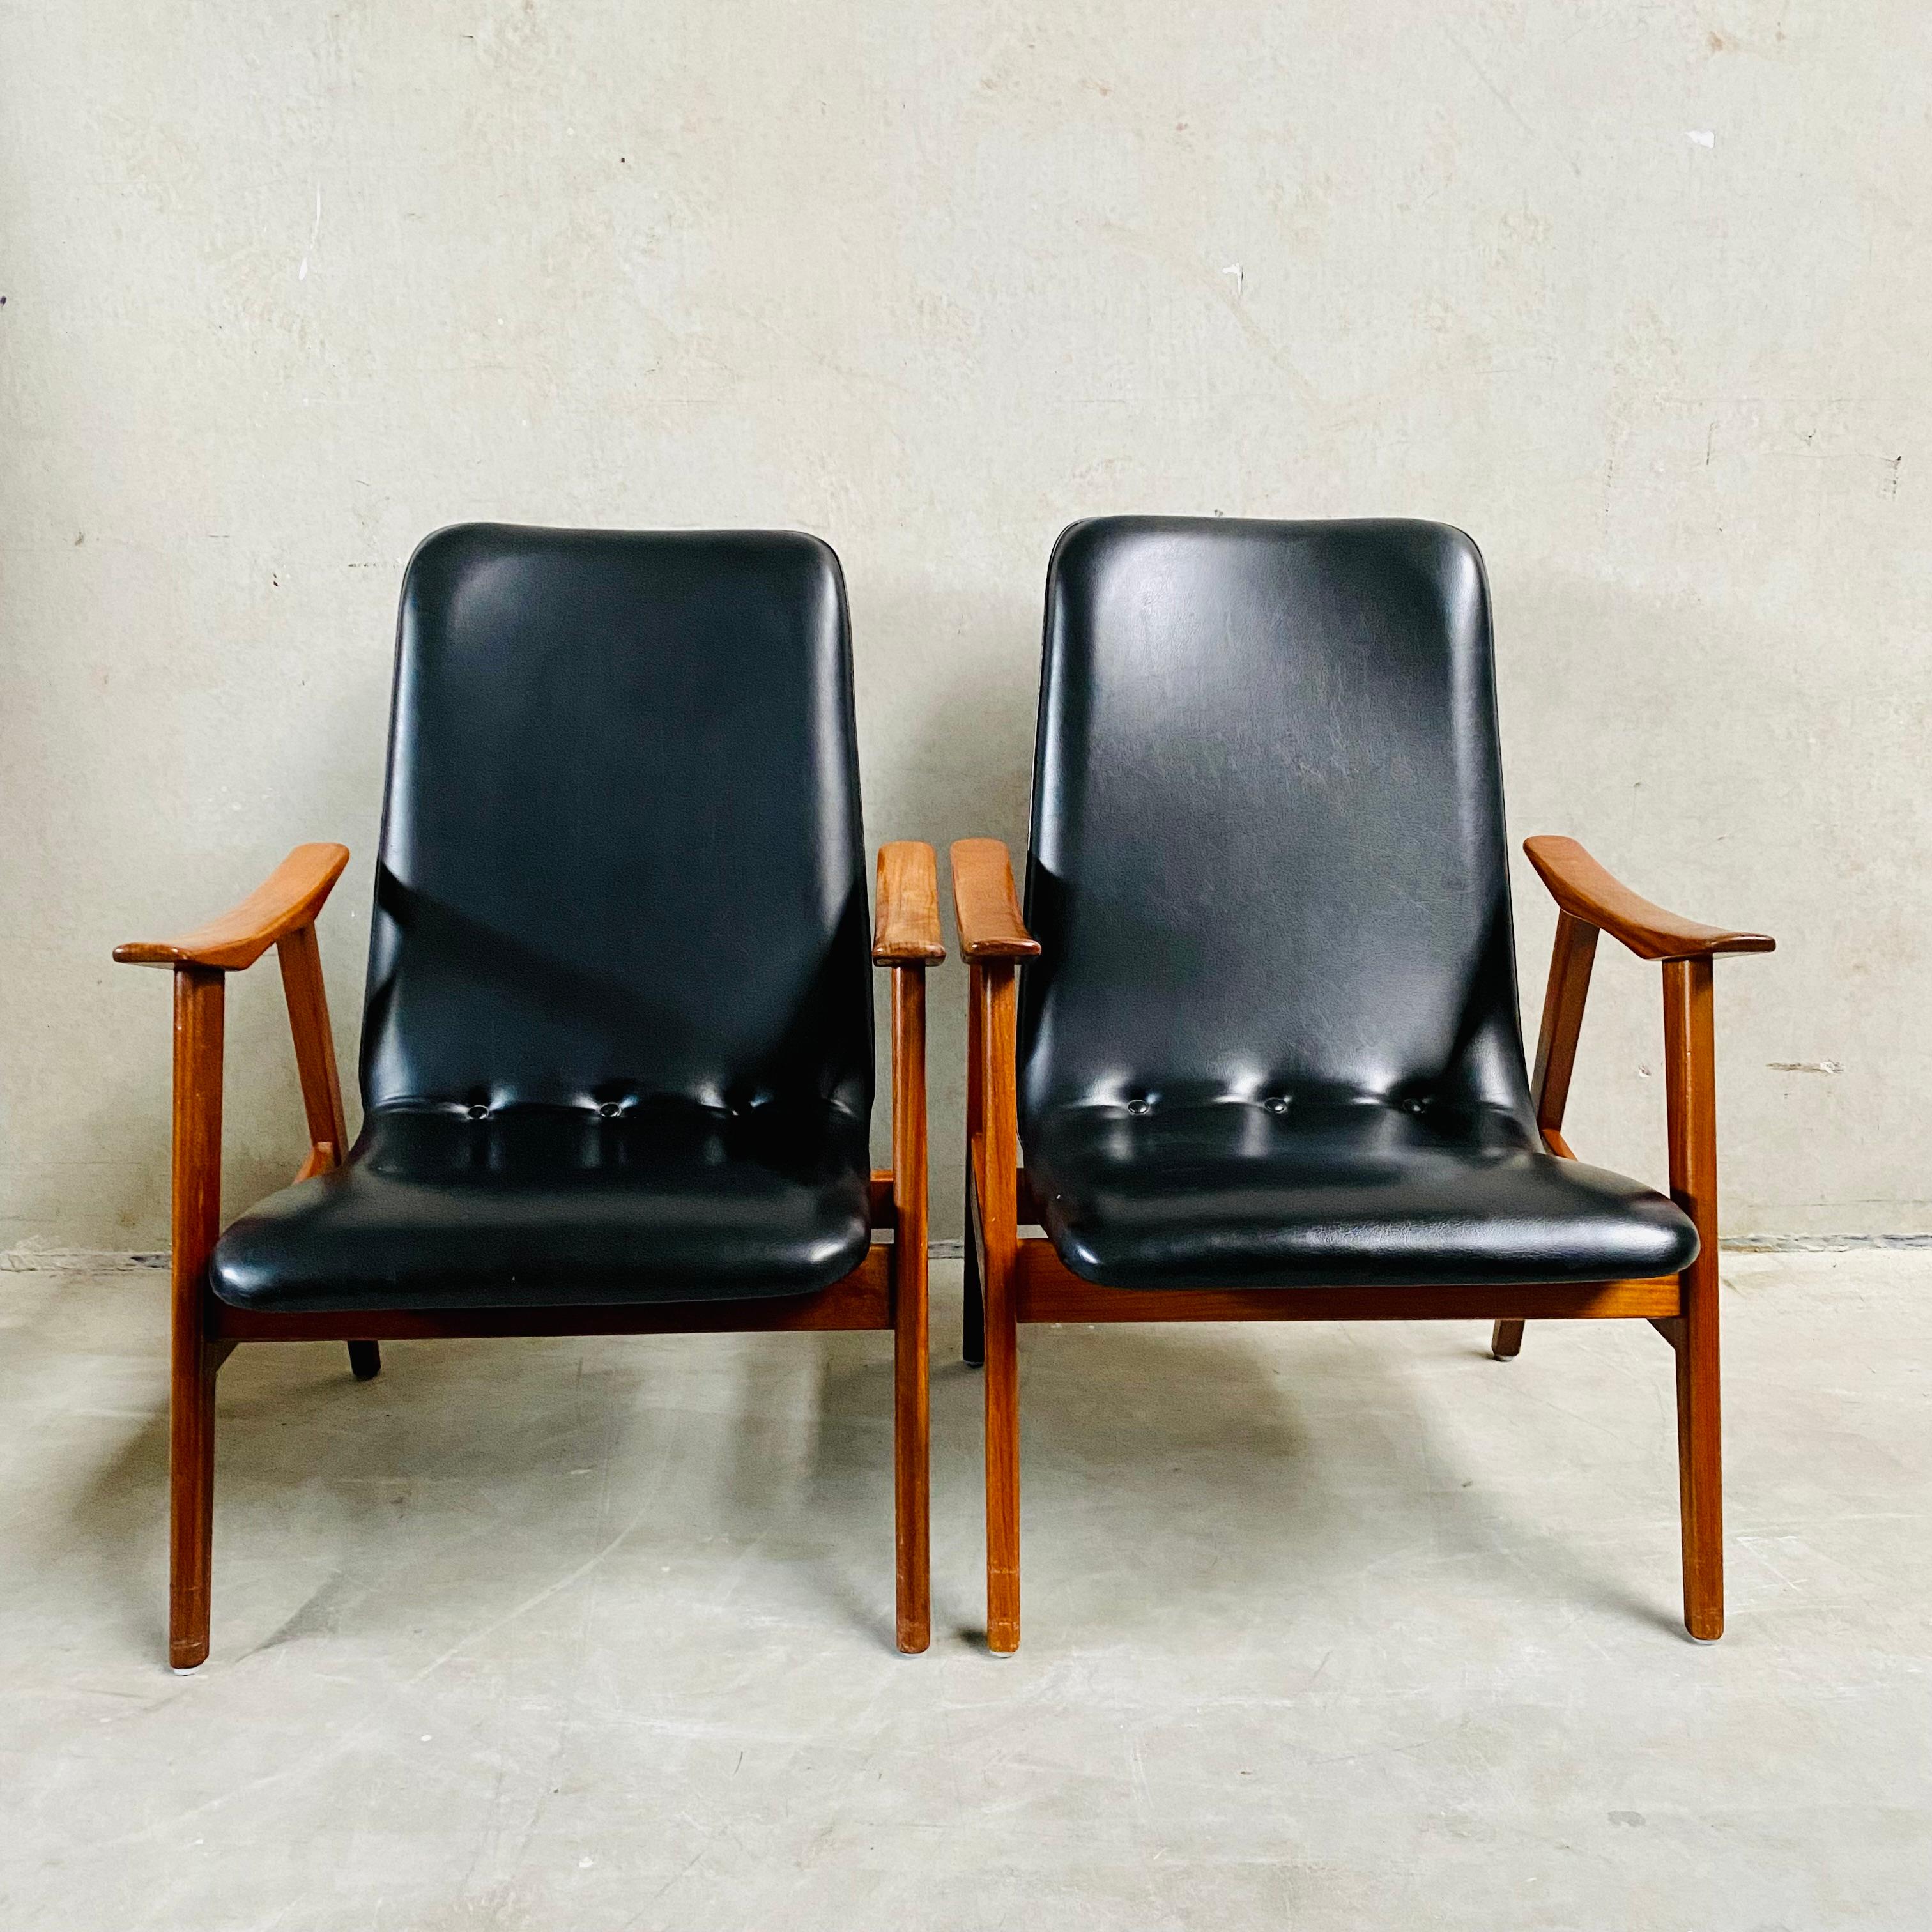 Set of Two Louis Van Teeffelen for Webe Lounge Chairs, Netherlands, 1960s For Sale 3